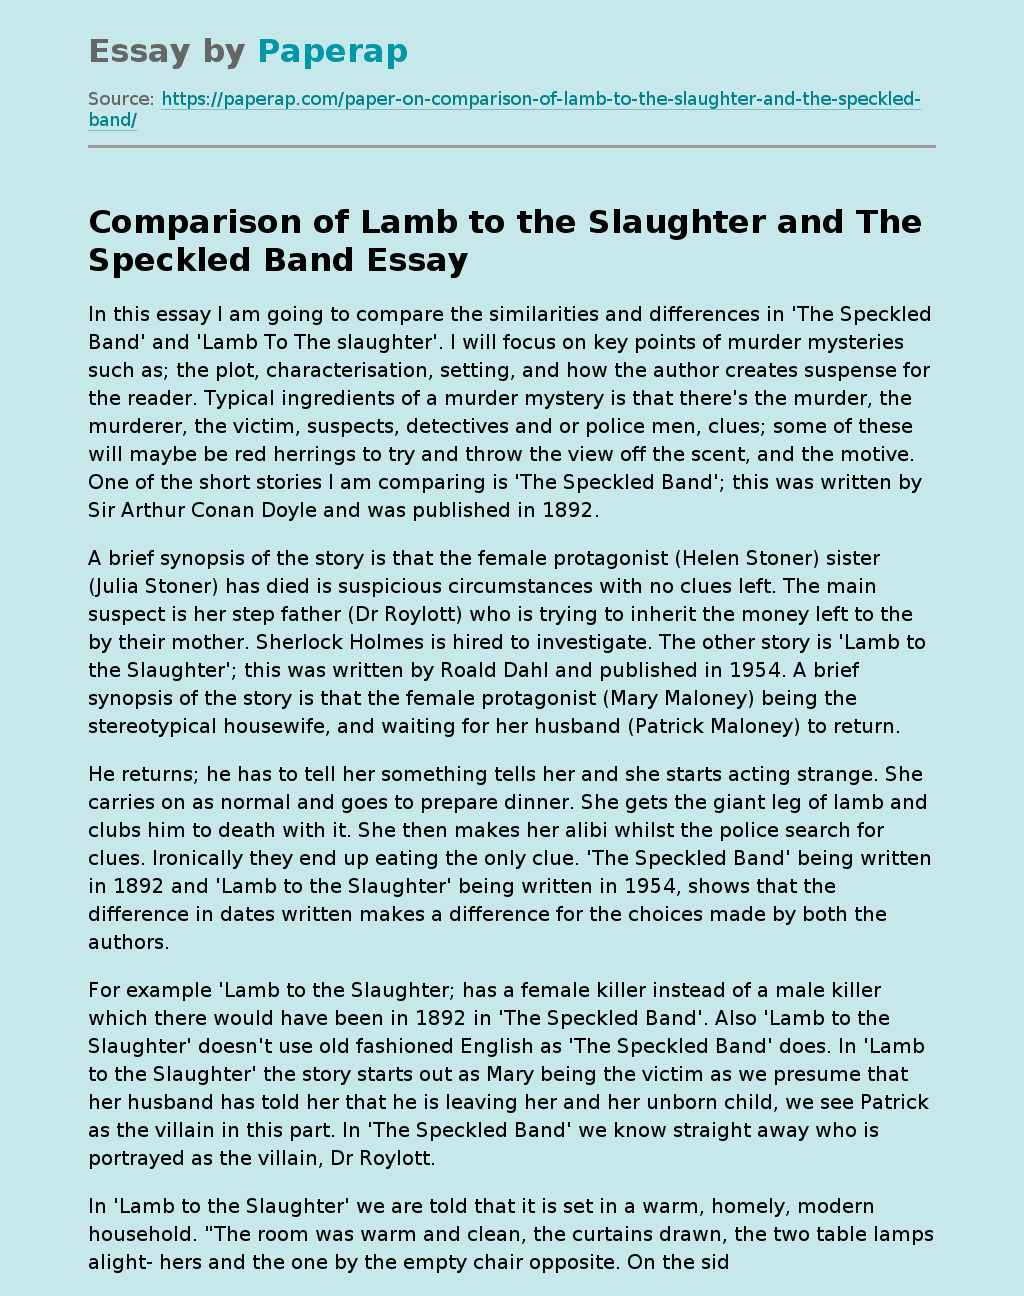 Comparison of Lamb to the Slaughter and The Speckled Band